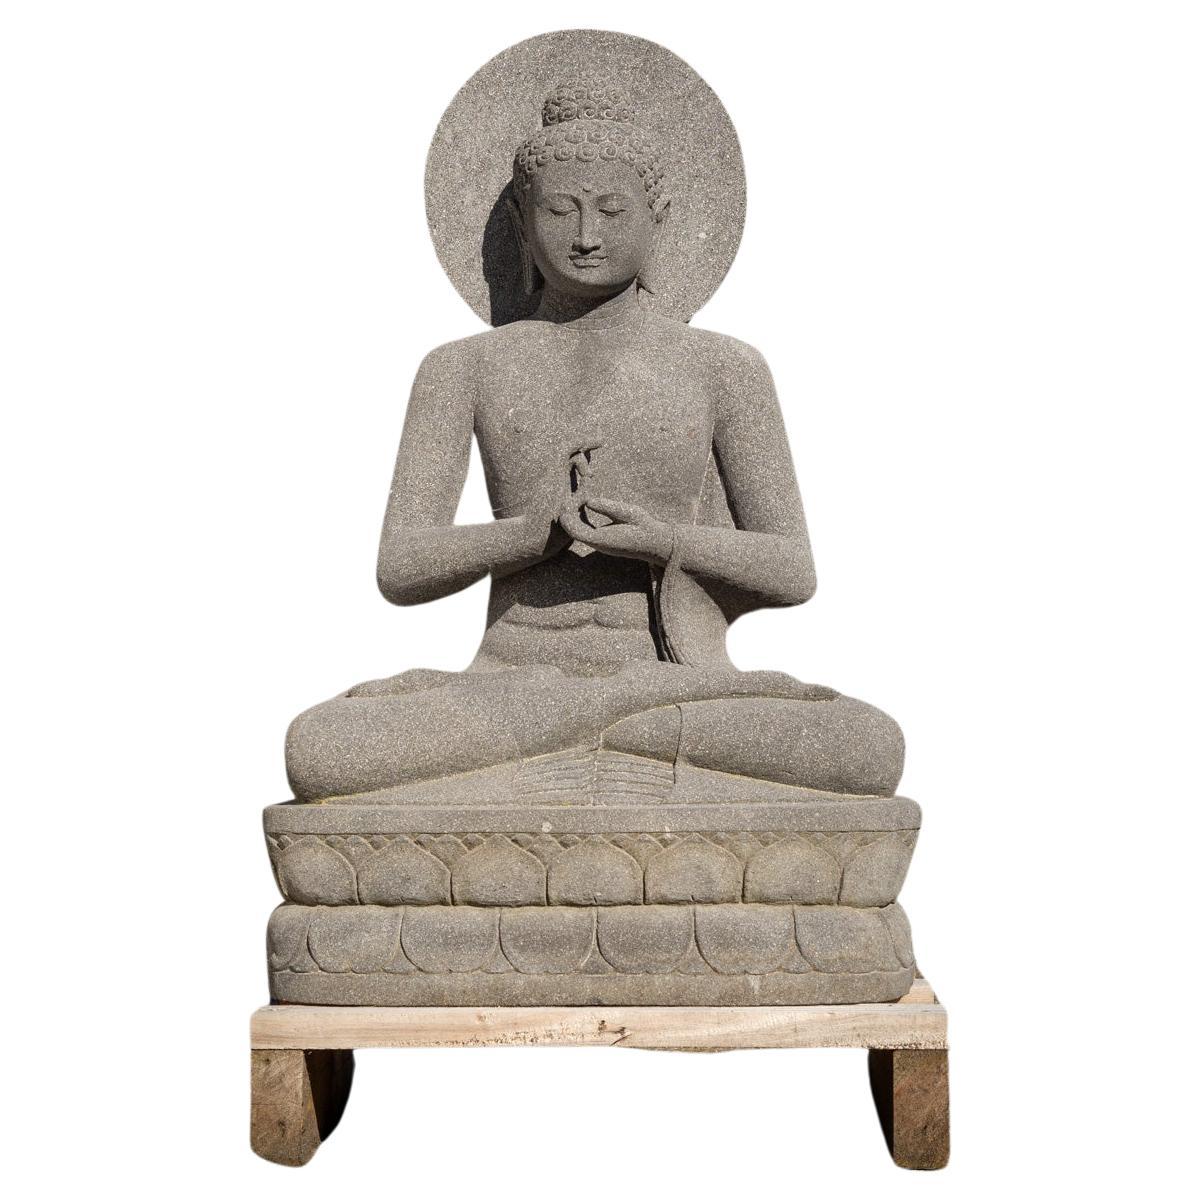 New beautiful lavastone Buddha statue from Indonesia in Dharmachakra mudr For Sale